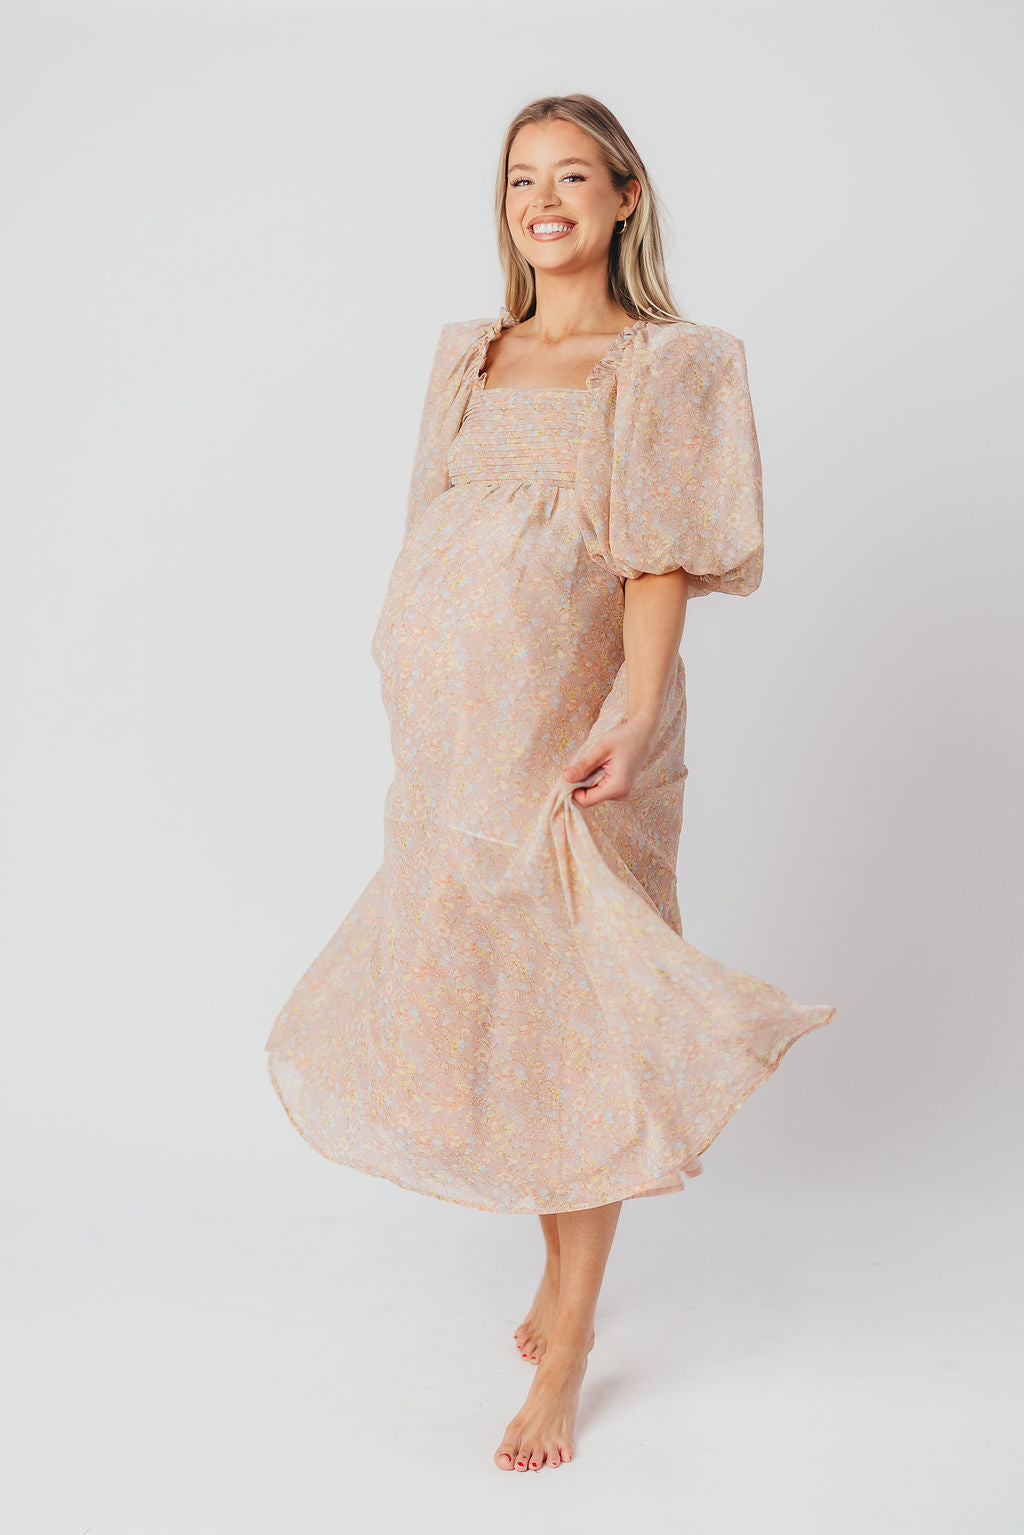 Melody Maxi Dress with Pleats and Bow Detail in Mauve Floral - Bump Friendly & Inclusive Sizing (S-3XL)